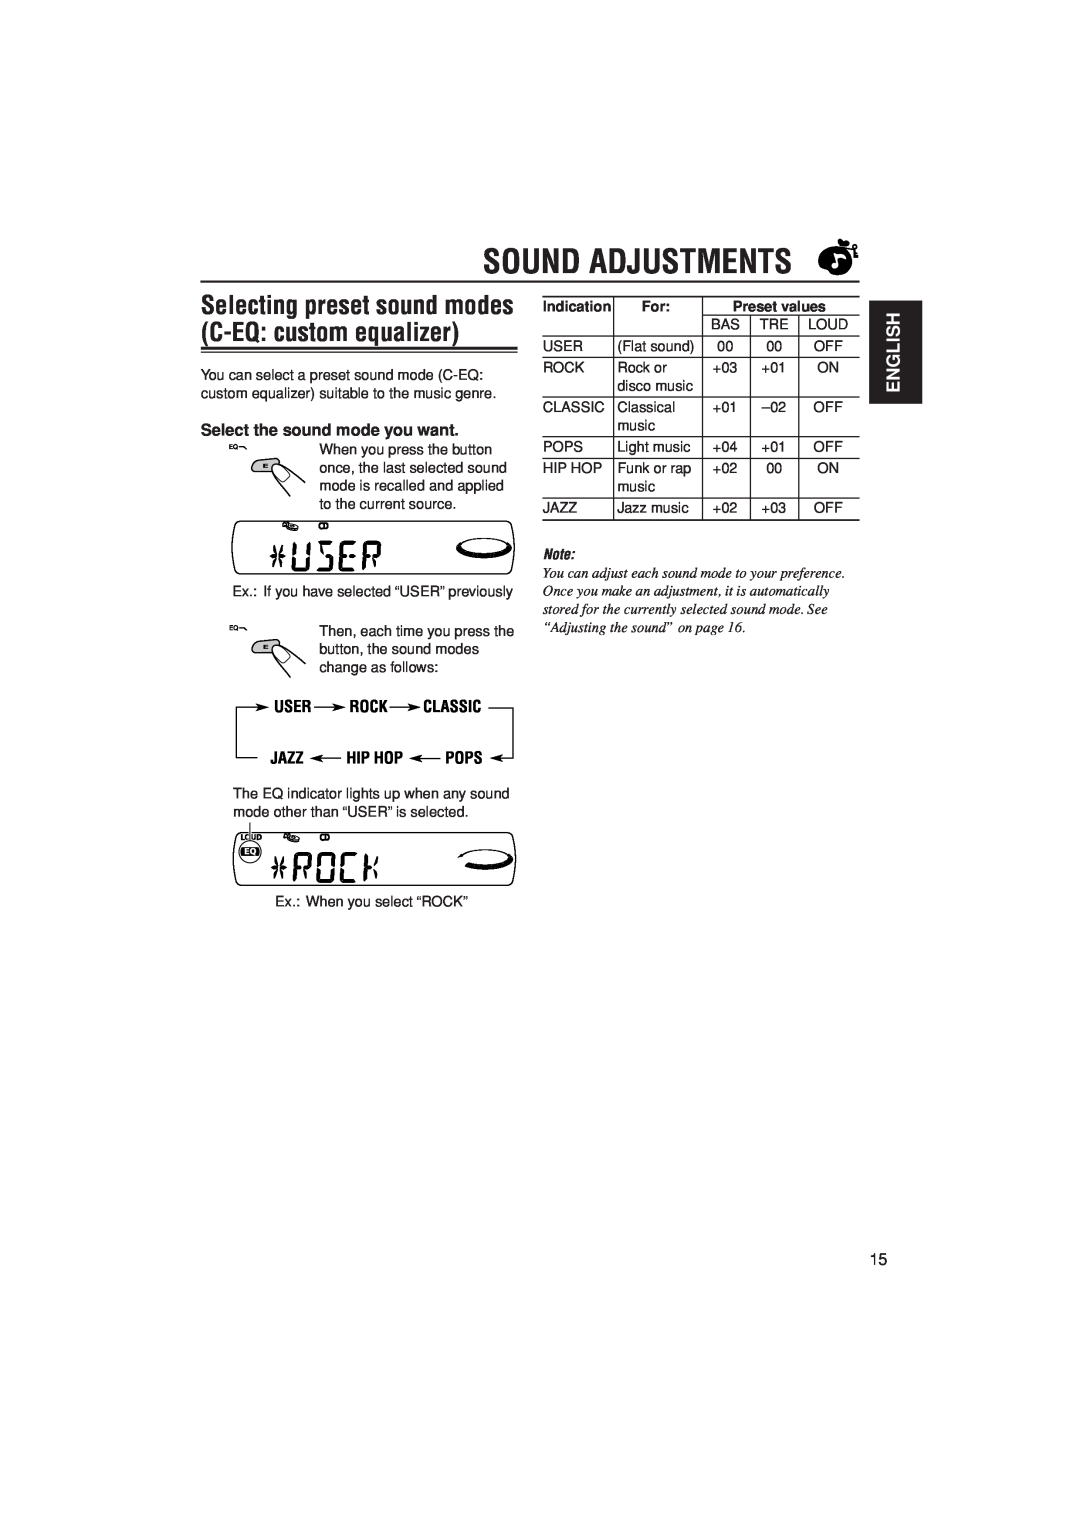 JVC KD-S20 Sound Adjustments, English, Select the sound mode you want, User Rock Classic Jazz Hip Hop Pops, Preset values 